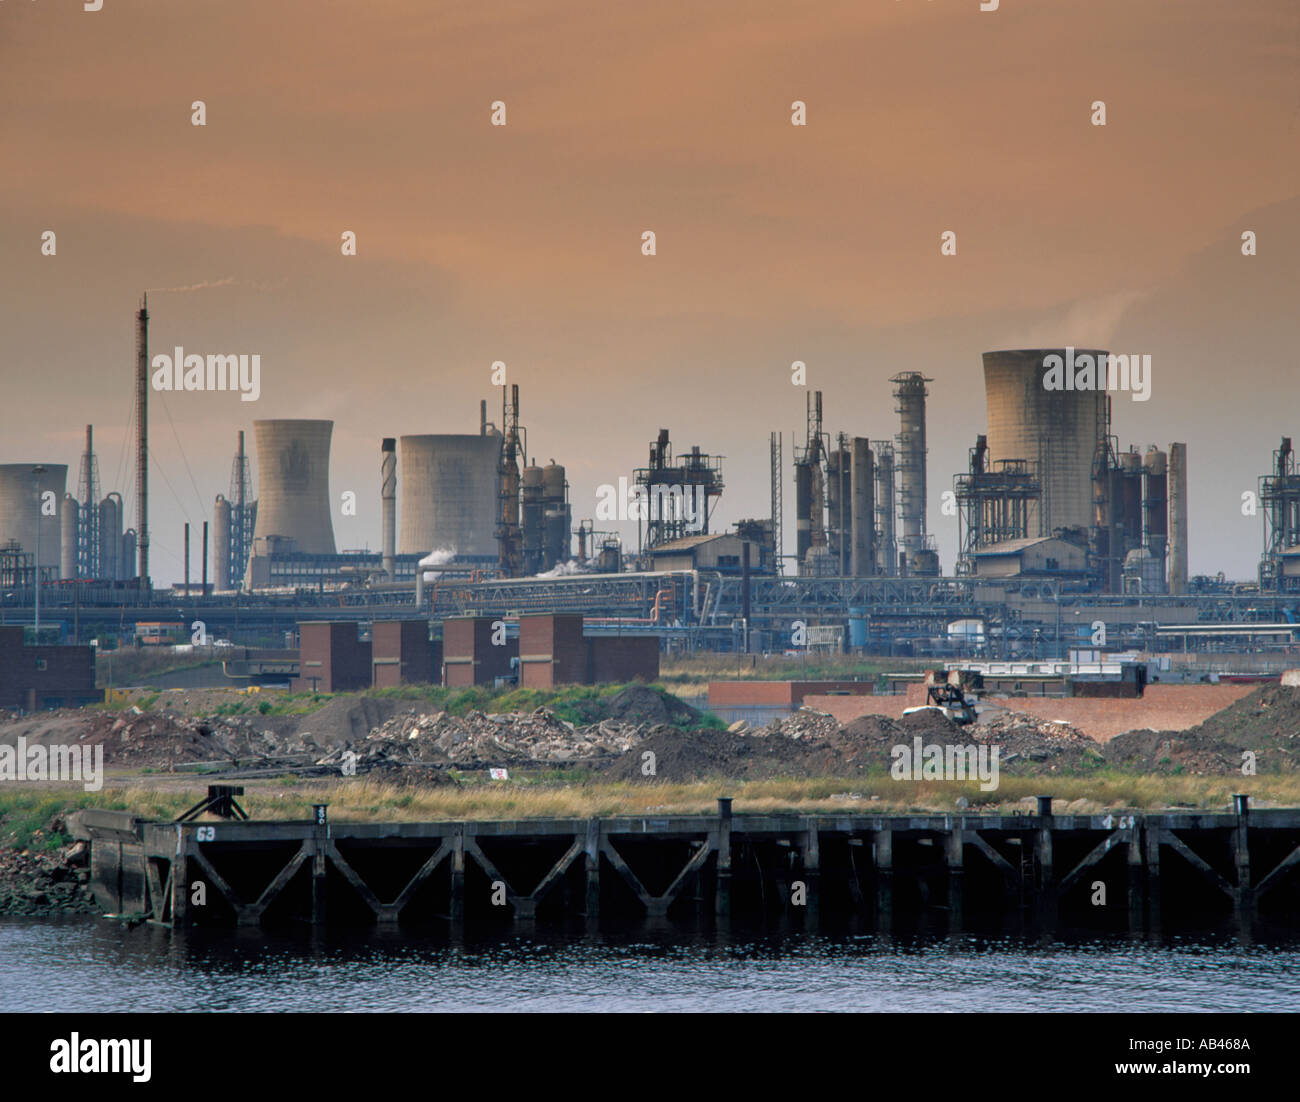 Chemical complex and cooling towers seen over River Tees and derelict land, Billingham, Teesside, Cleveland, England, UK. in the 1980s Stock Photo